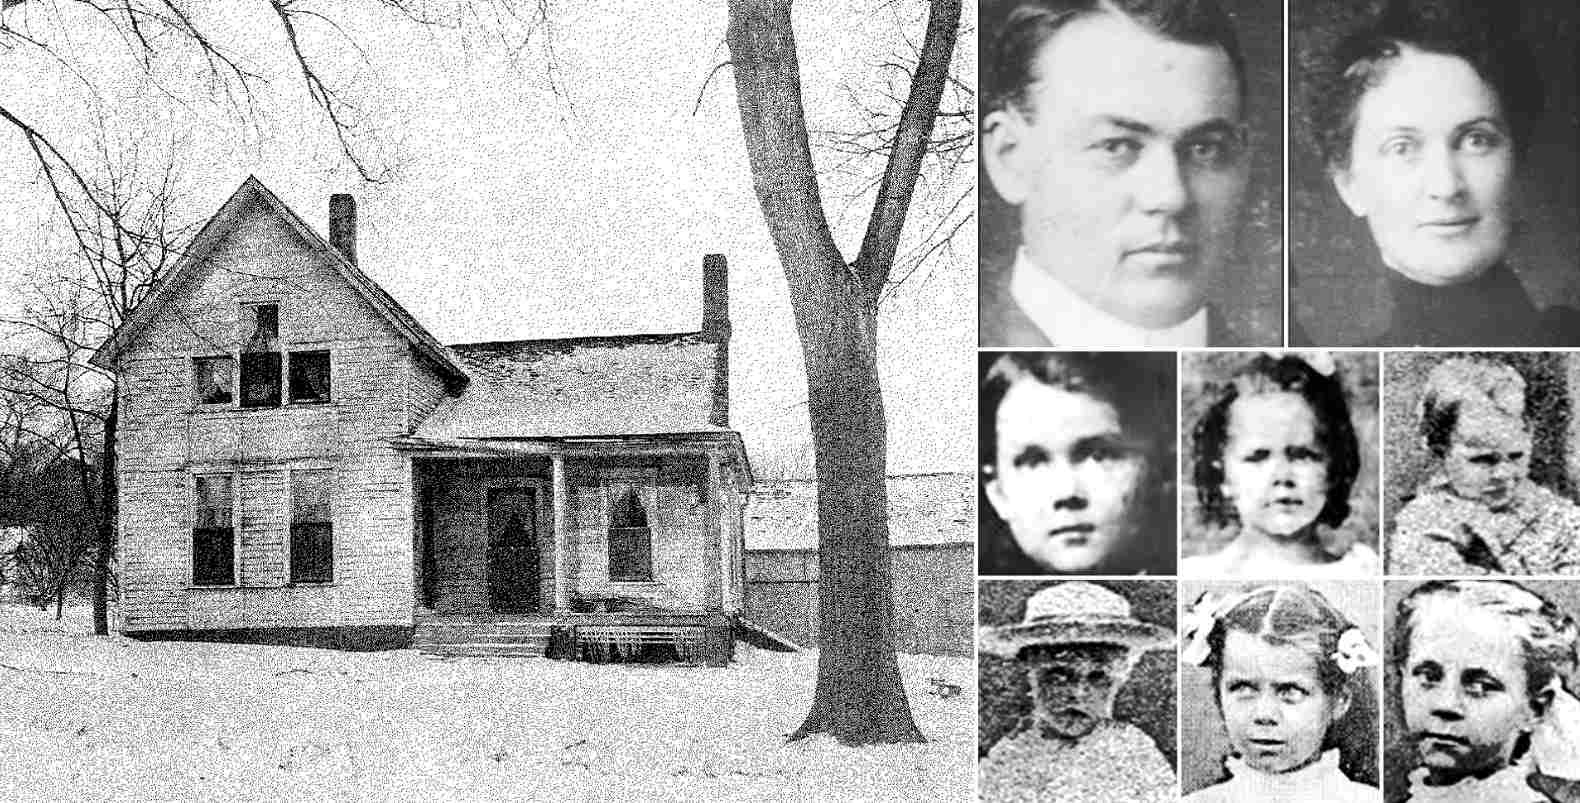 The 13 creepiest unsolved murders – They remained unidentified! 10